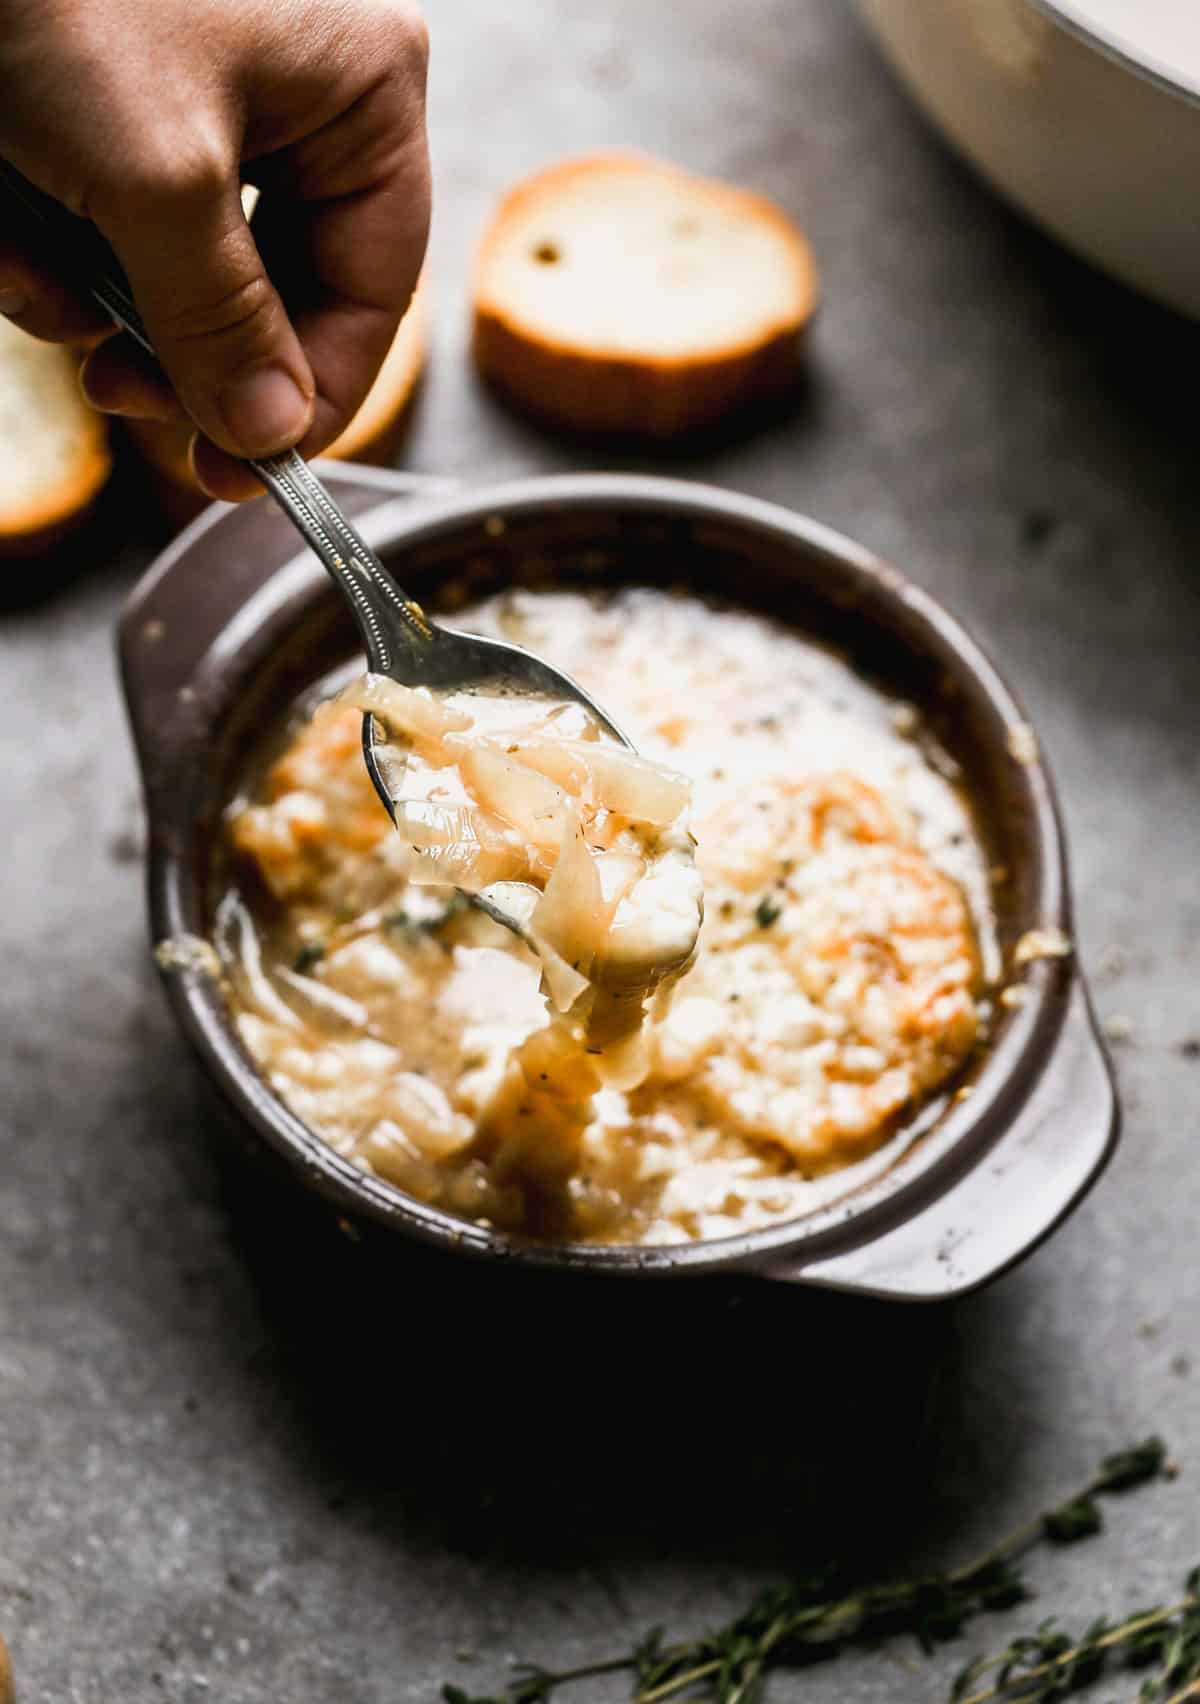 A spoon lifting up a bite of a simple French Onion Soup recipe.